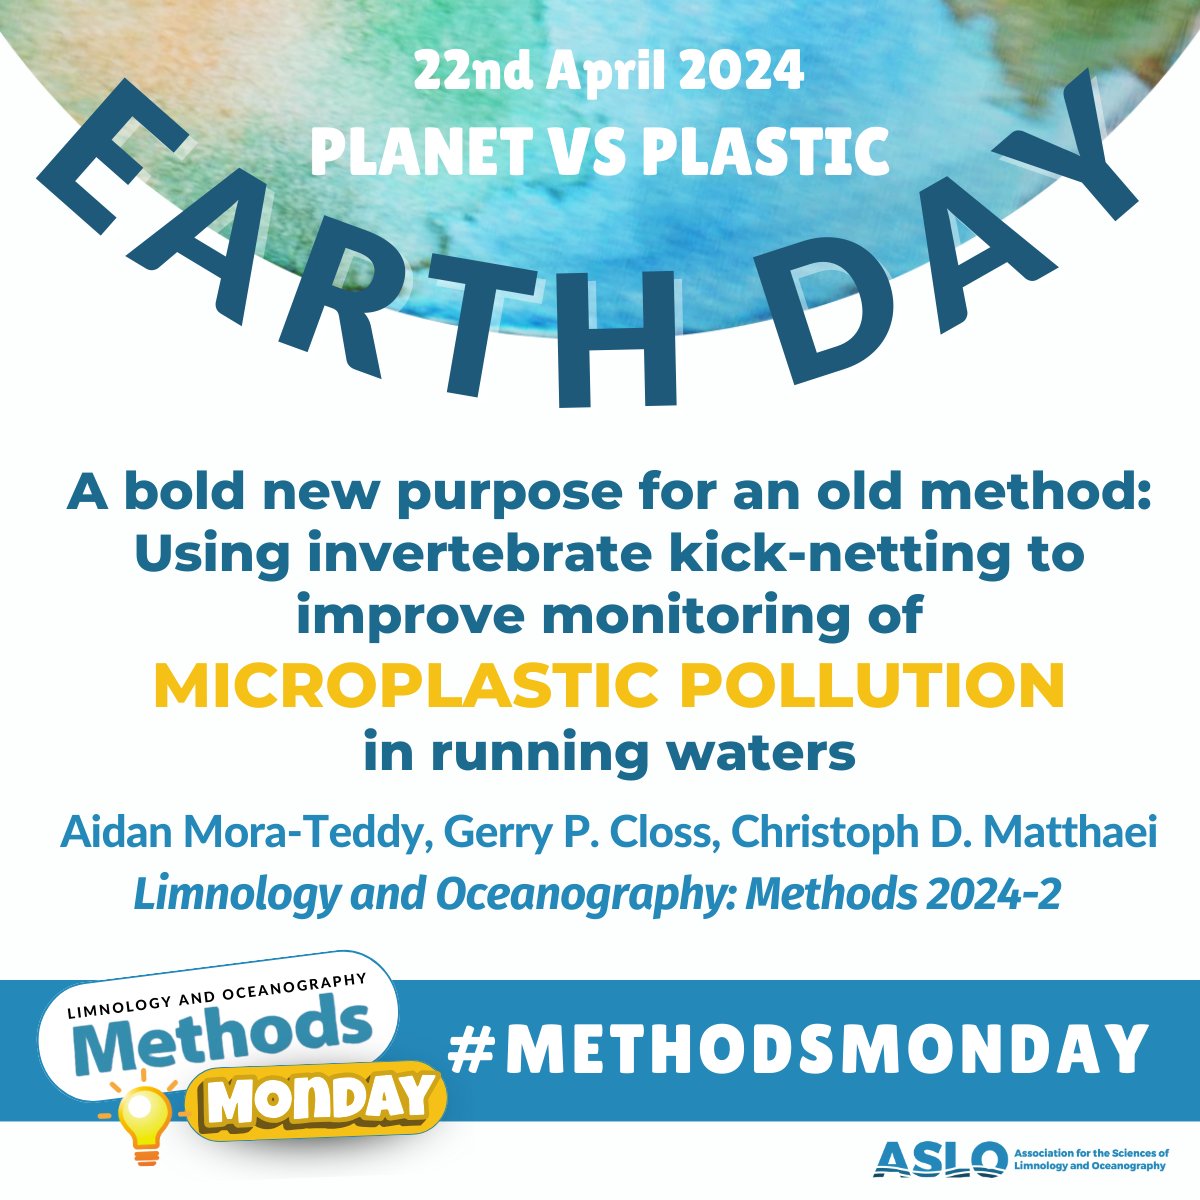 🫶 🌍 To celebrate 2024 #EarthDay and #Methodsmonday, we are embracing the theme 'Planet vs Plastic' by highlighting an #ASLO_Methods article on #microplastics as a reminder for the need for collective action to protect our planet's ecosystems 🌊🌱 aslopubs.onlinelibrary.wiley.com/doi/10.1002/lo… #ASLO